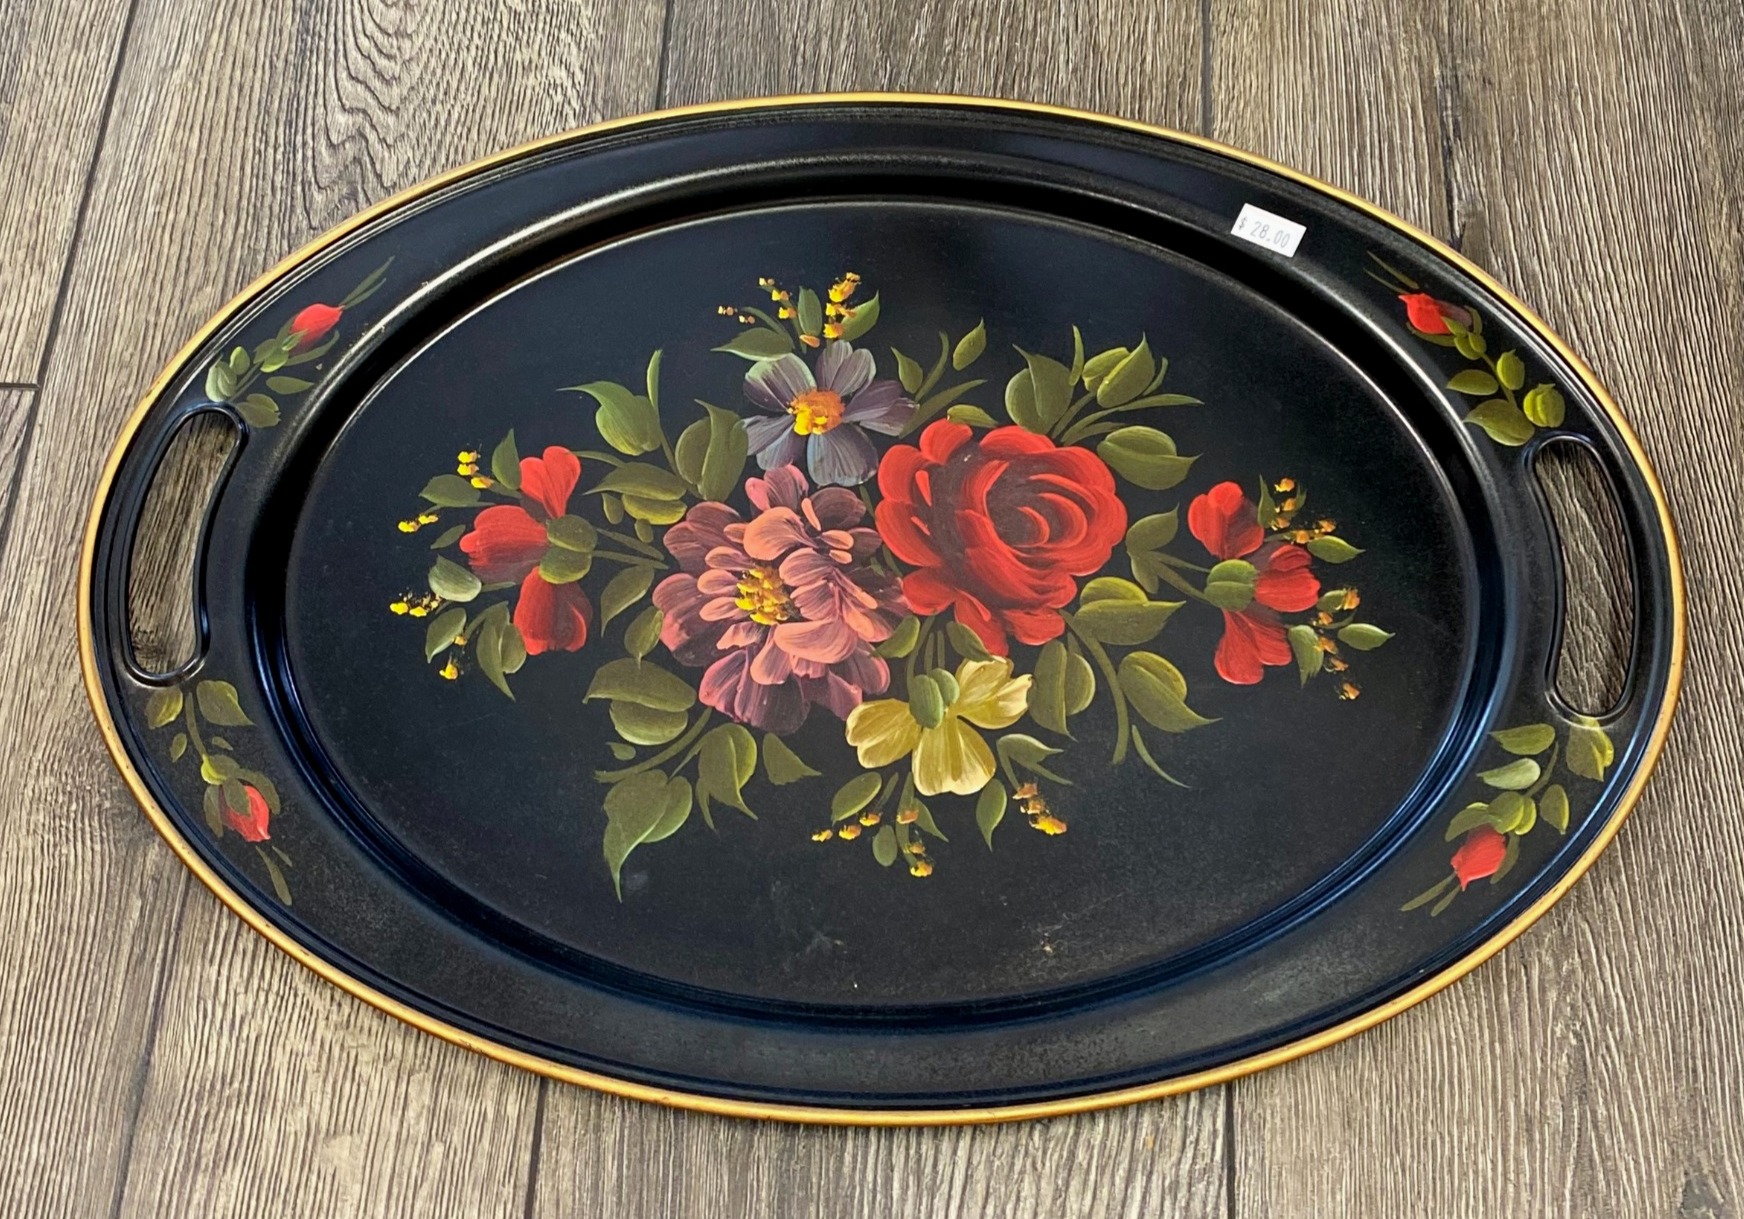 Black Toleware Tray with Hand Painted Floral Motif and gold trim